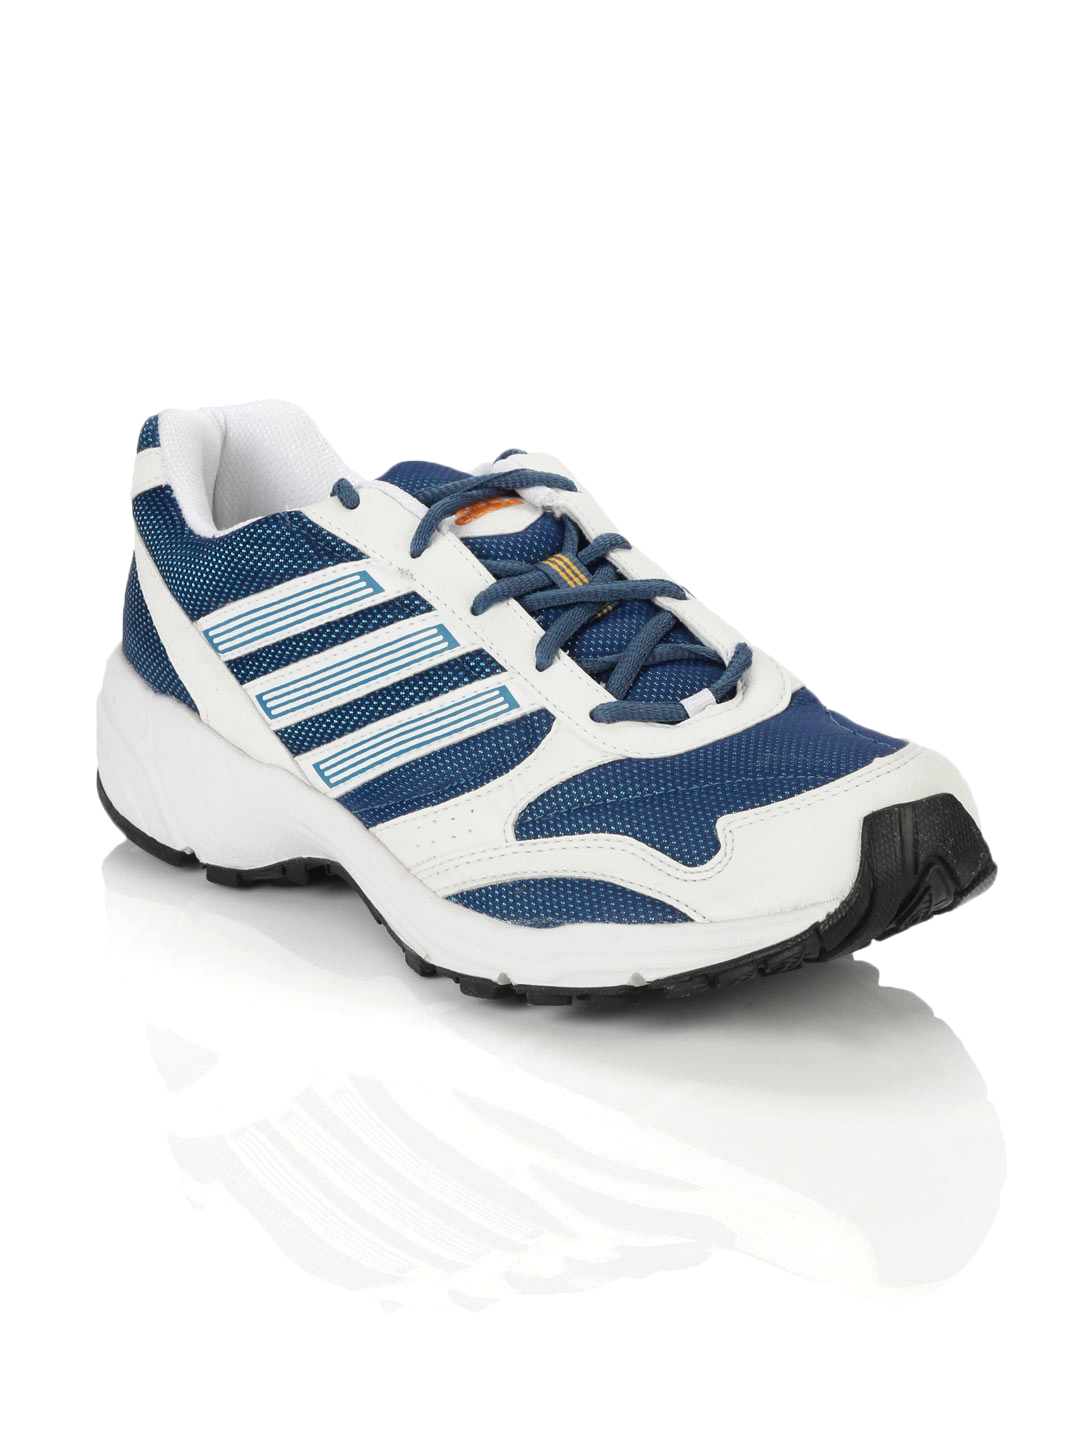 Download this More Sports Shoes From... picture